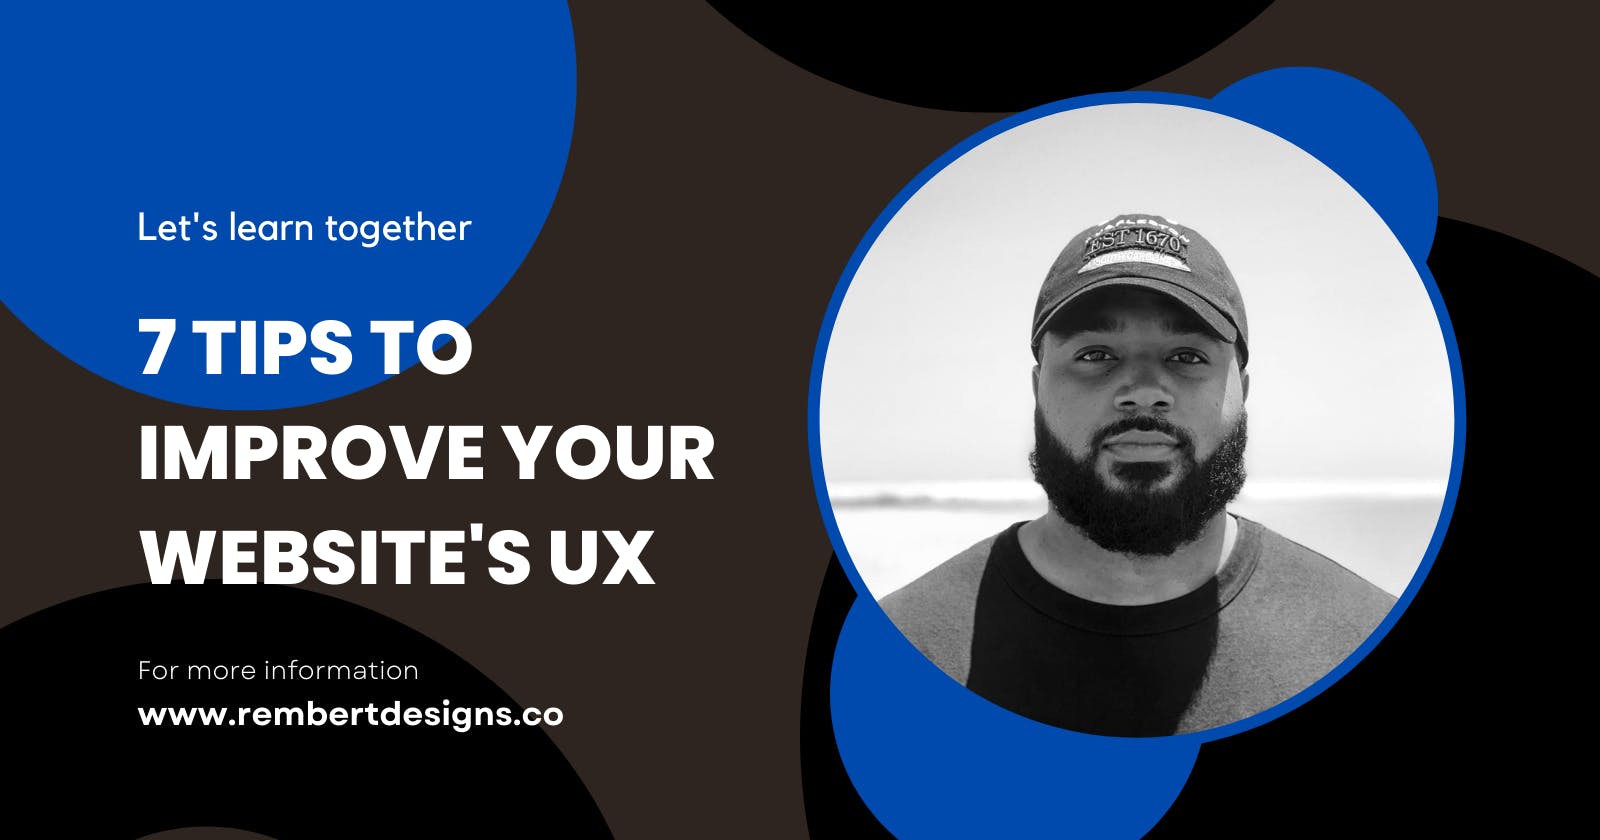 7 Tips to Improve Your Website's UX